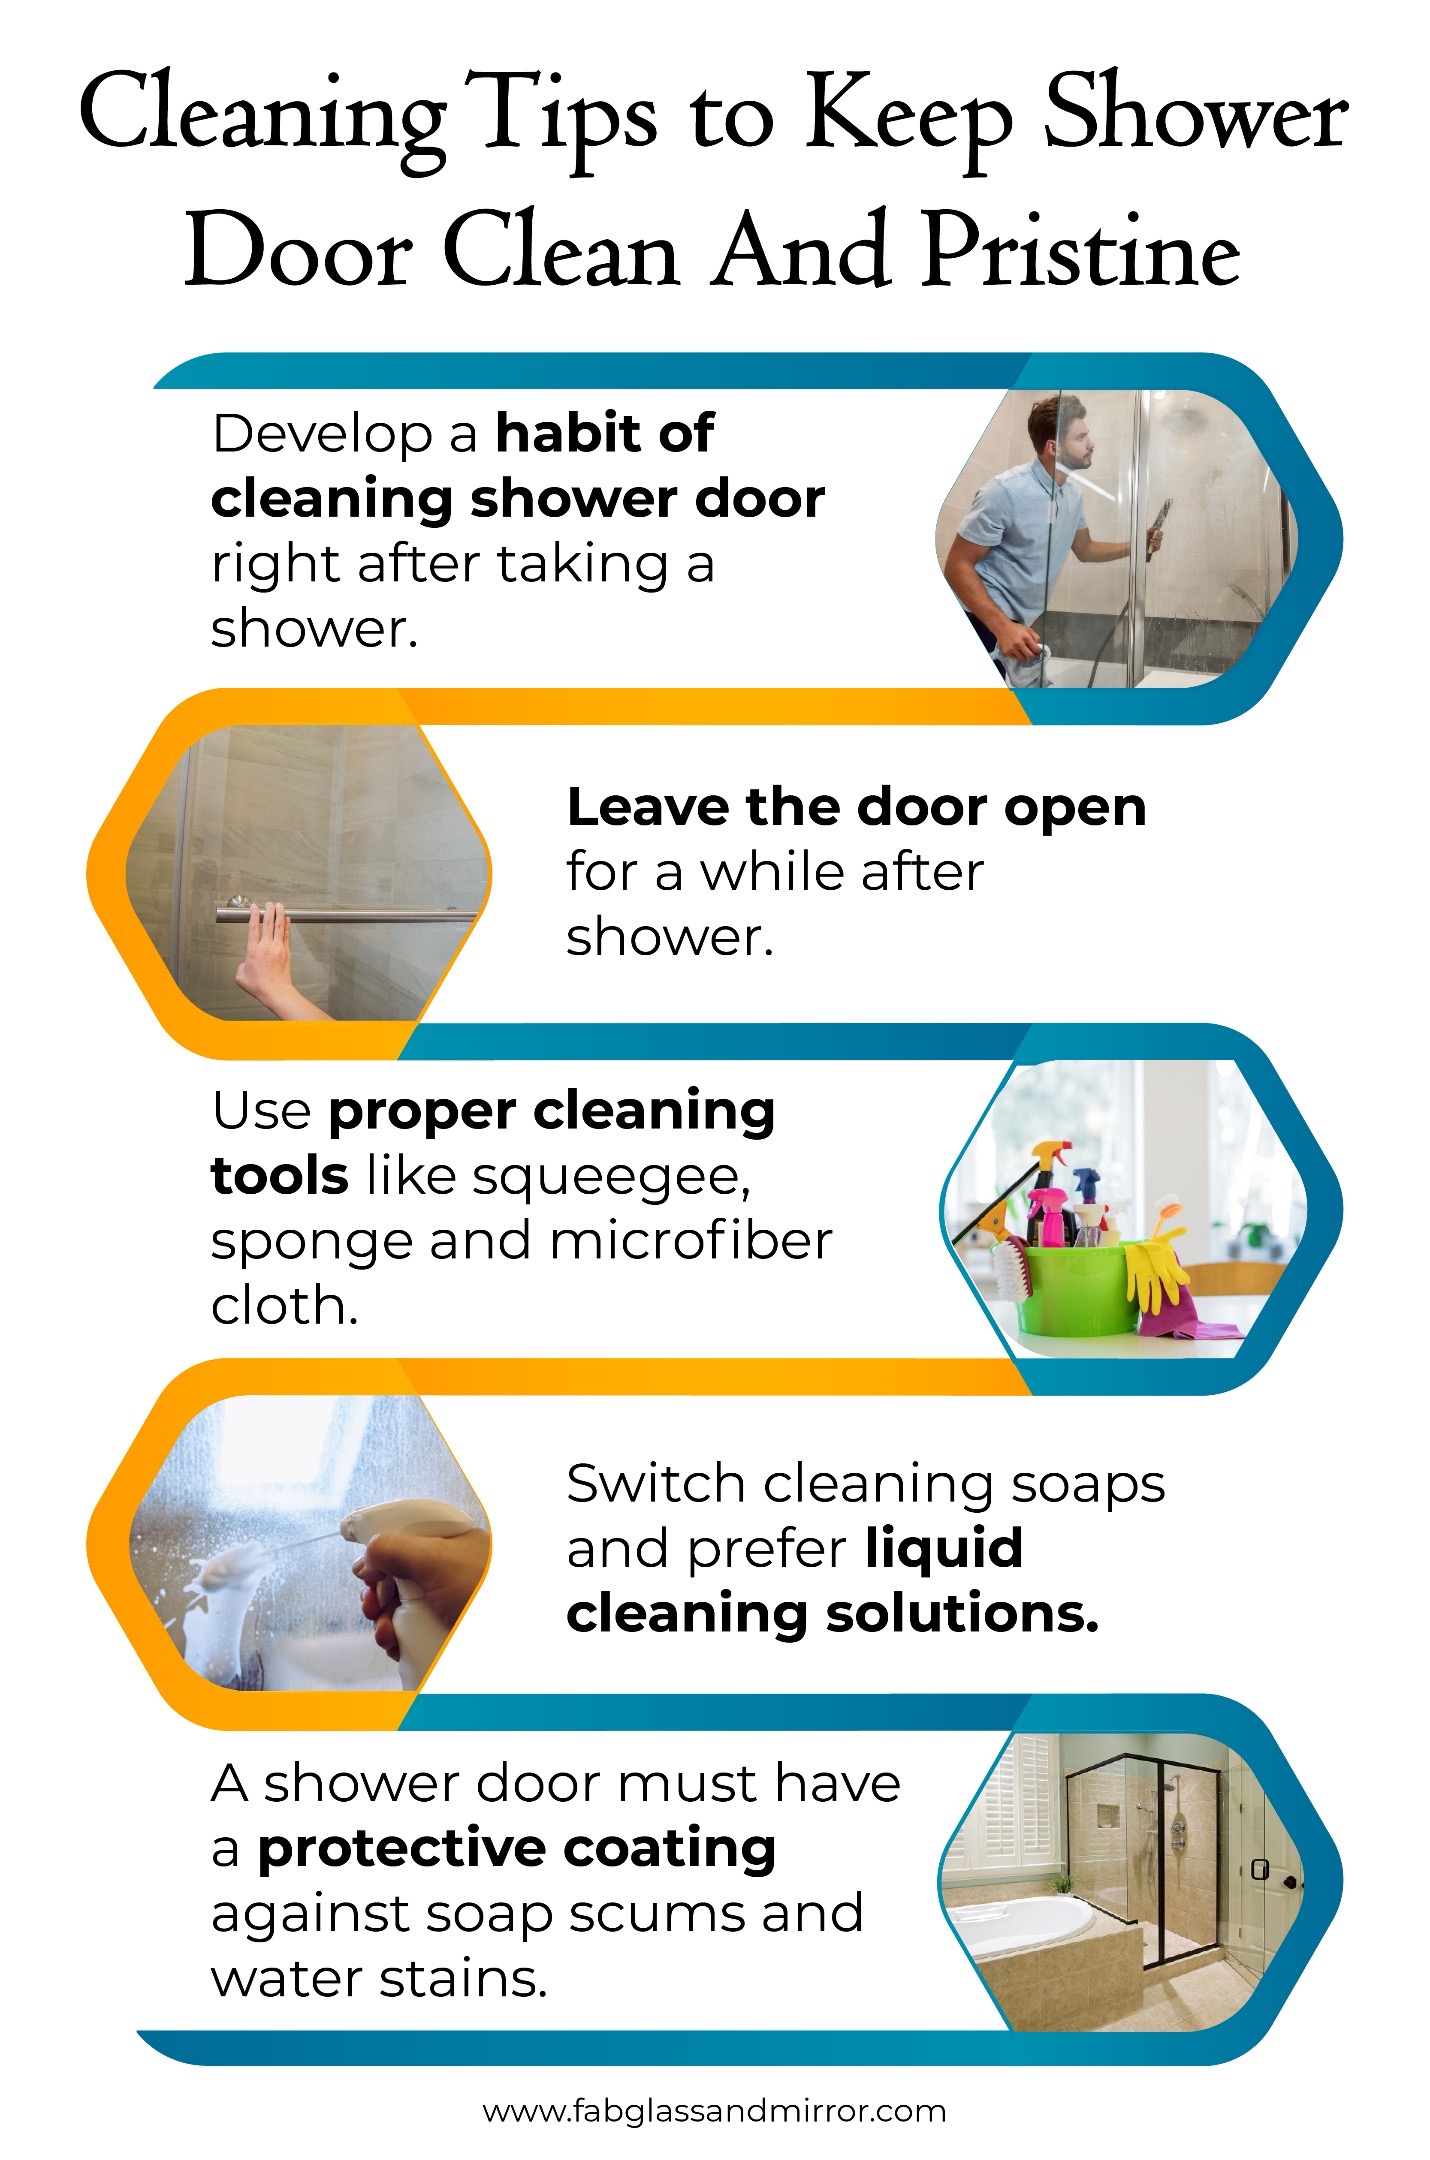 How to clean a shower and tips to keep it clean